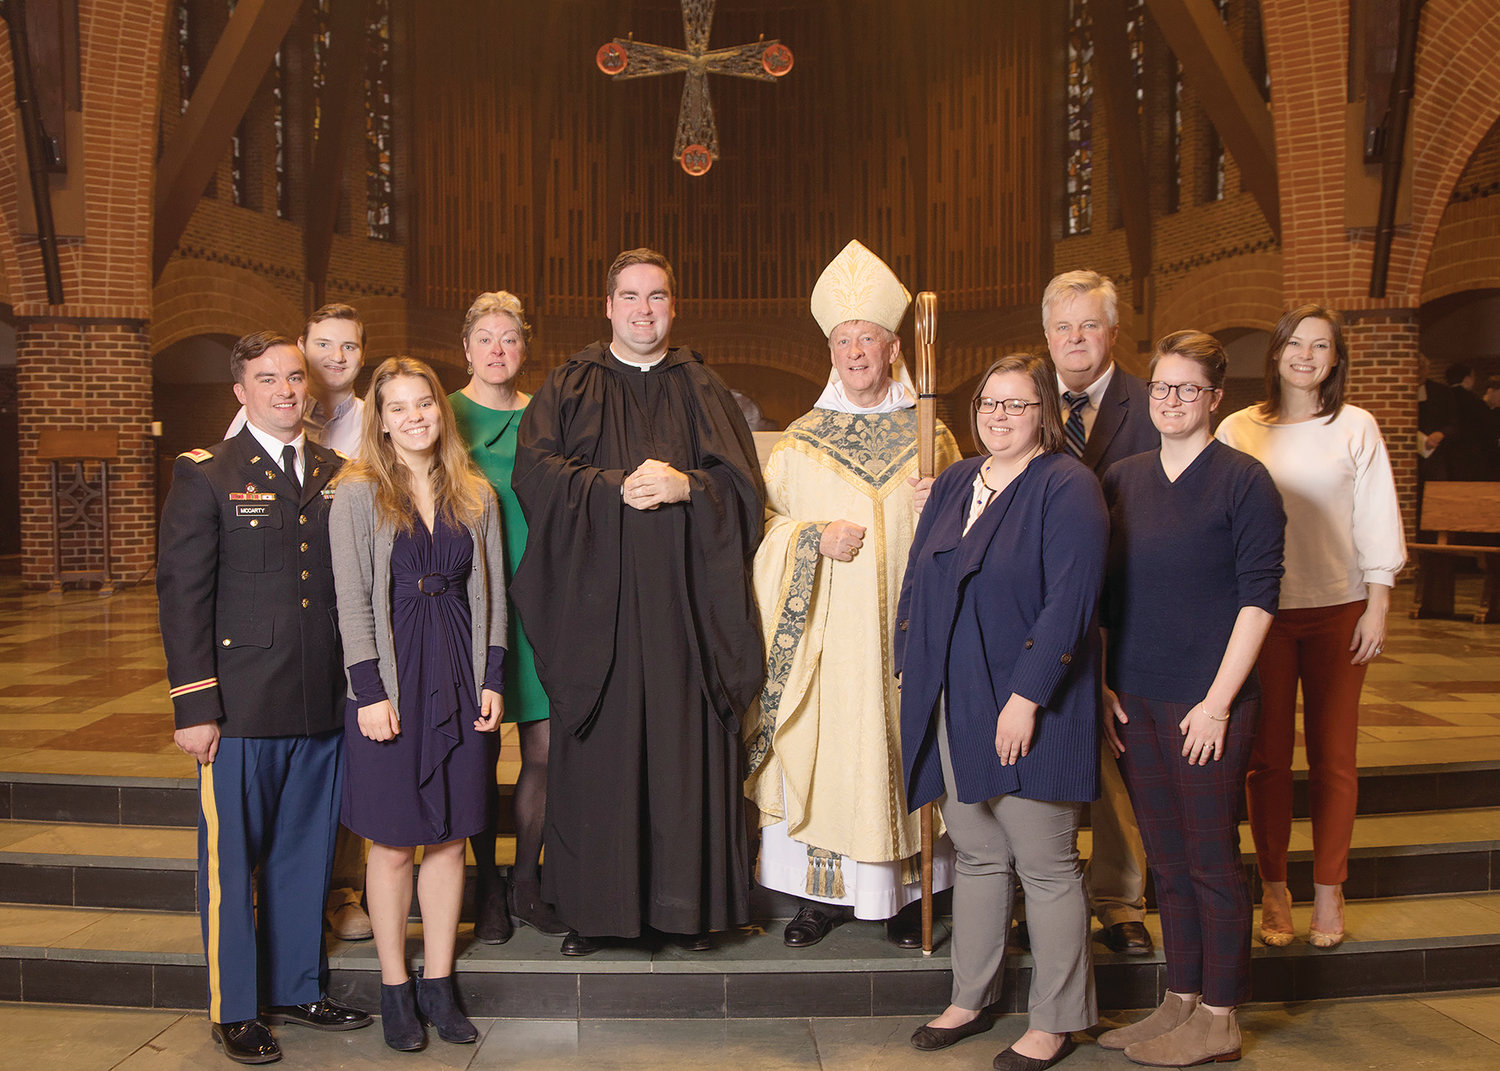 PROFESSION OF SOLEMN VOWS: Abbot Mark Cooper, O.S.B., gathers with Brother Francis Ryan McCarty, O.S.B., and his parents and siblings following Brother Francis’ profession of solemn vows on Feb. 2 at Saint Anselm Abbey.